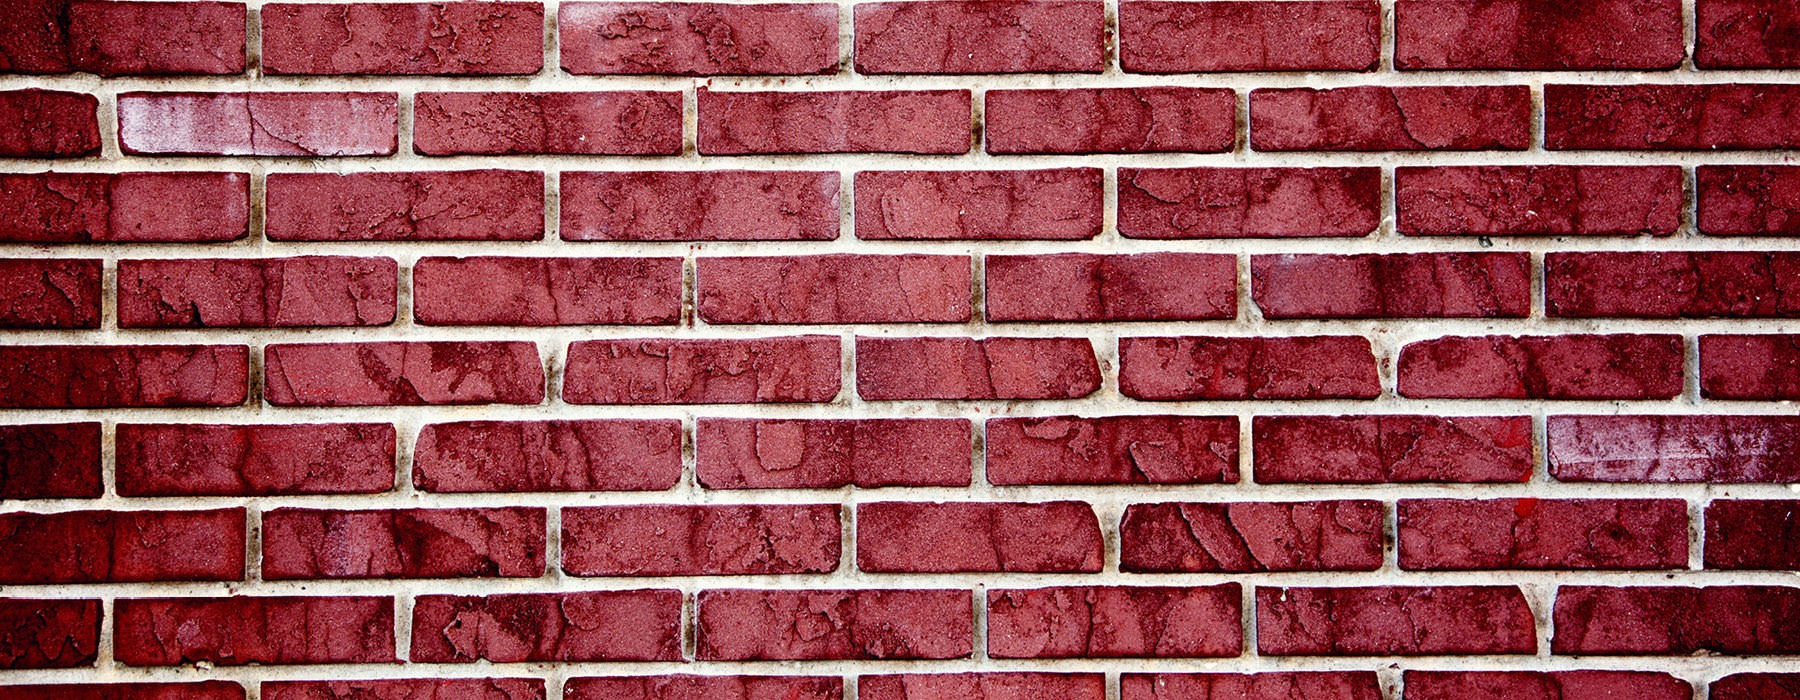 red brick wall with white grouting